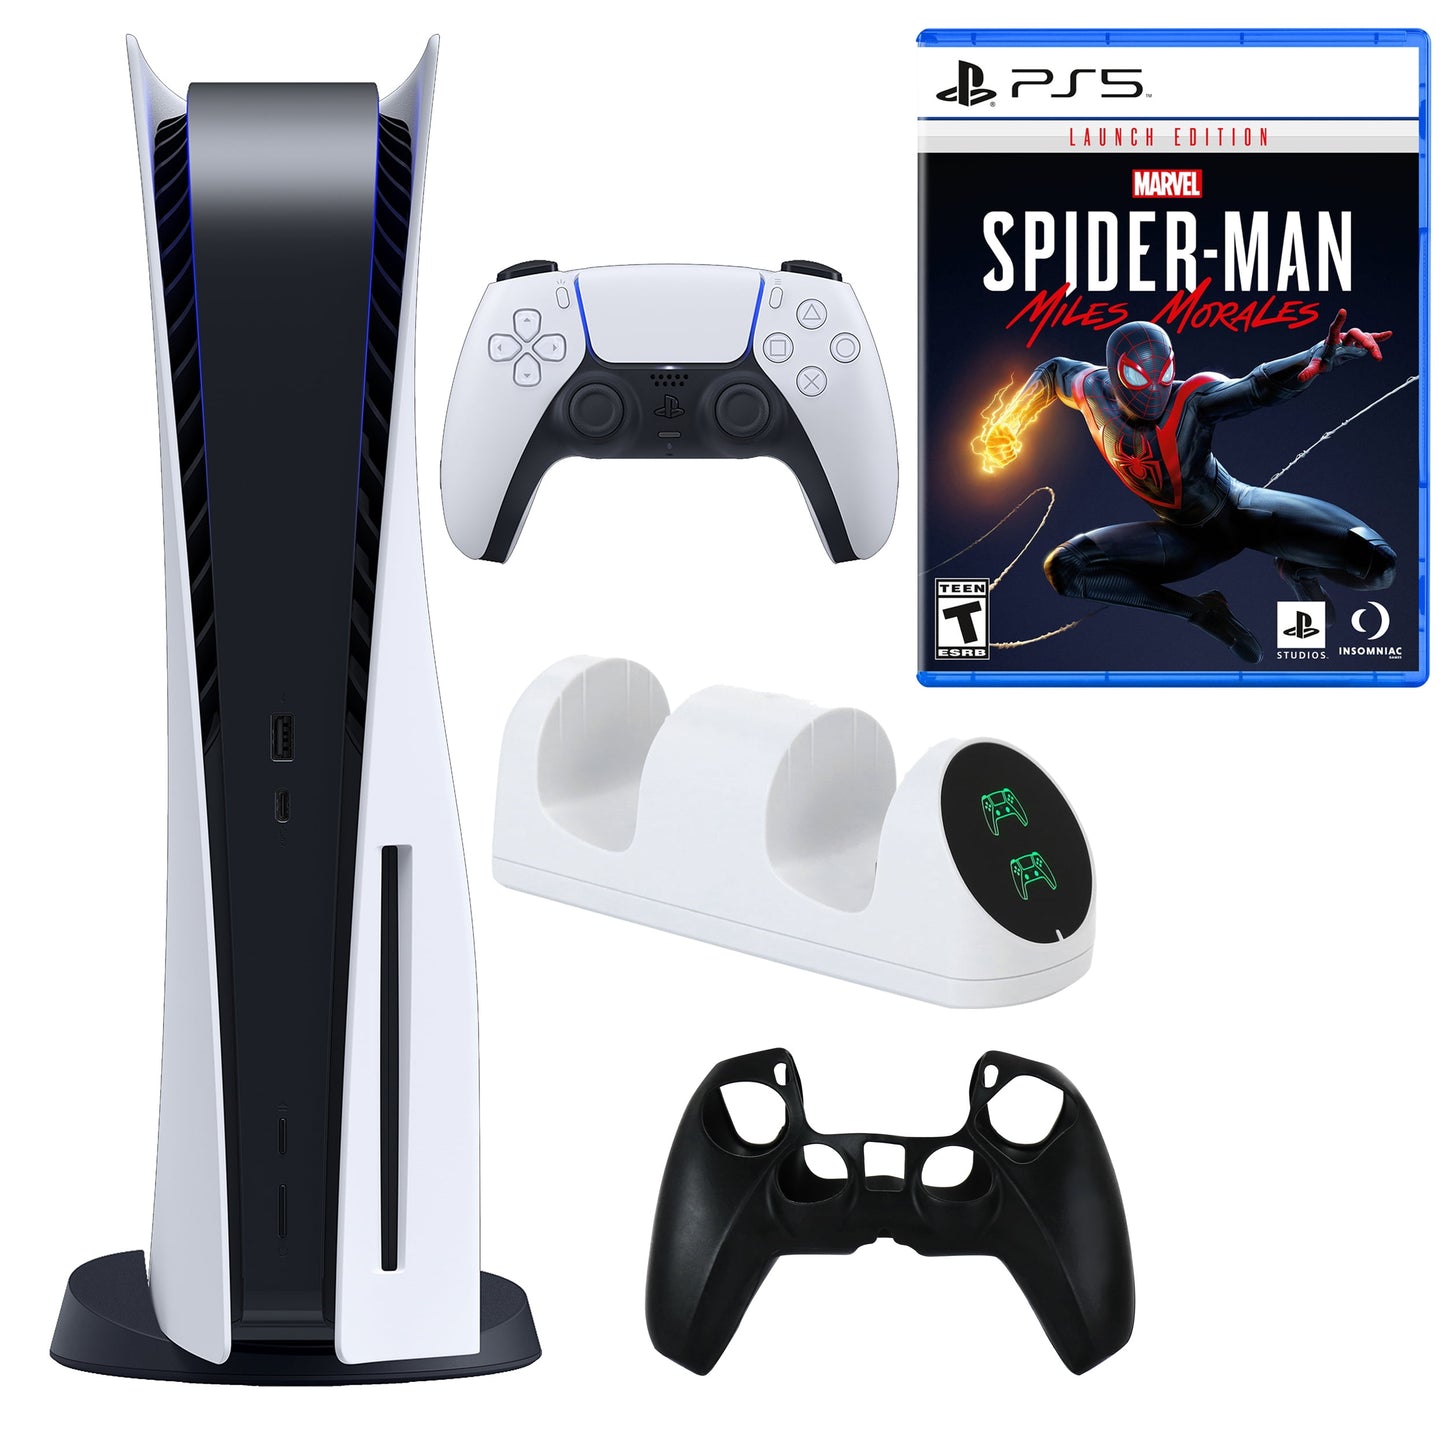 PlayStation 5 Console with Spiderman Miles Morales Game and Accessories